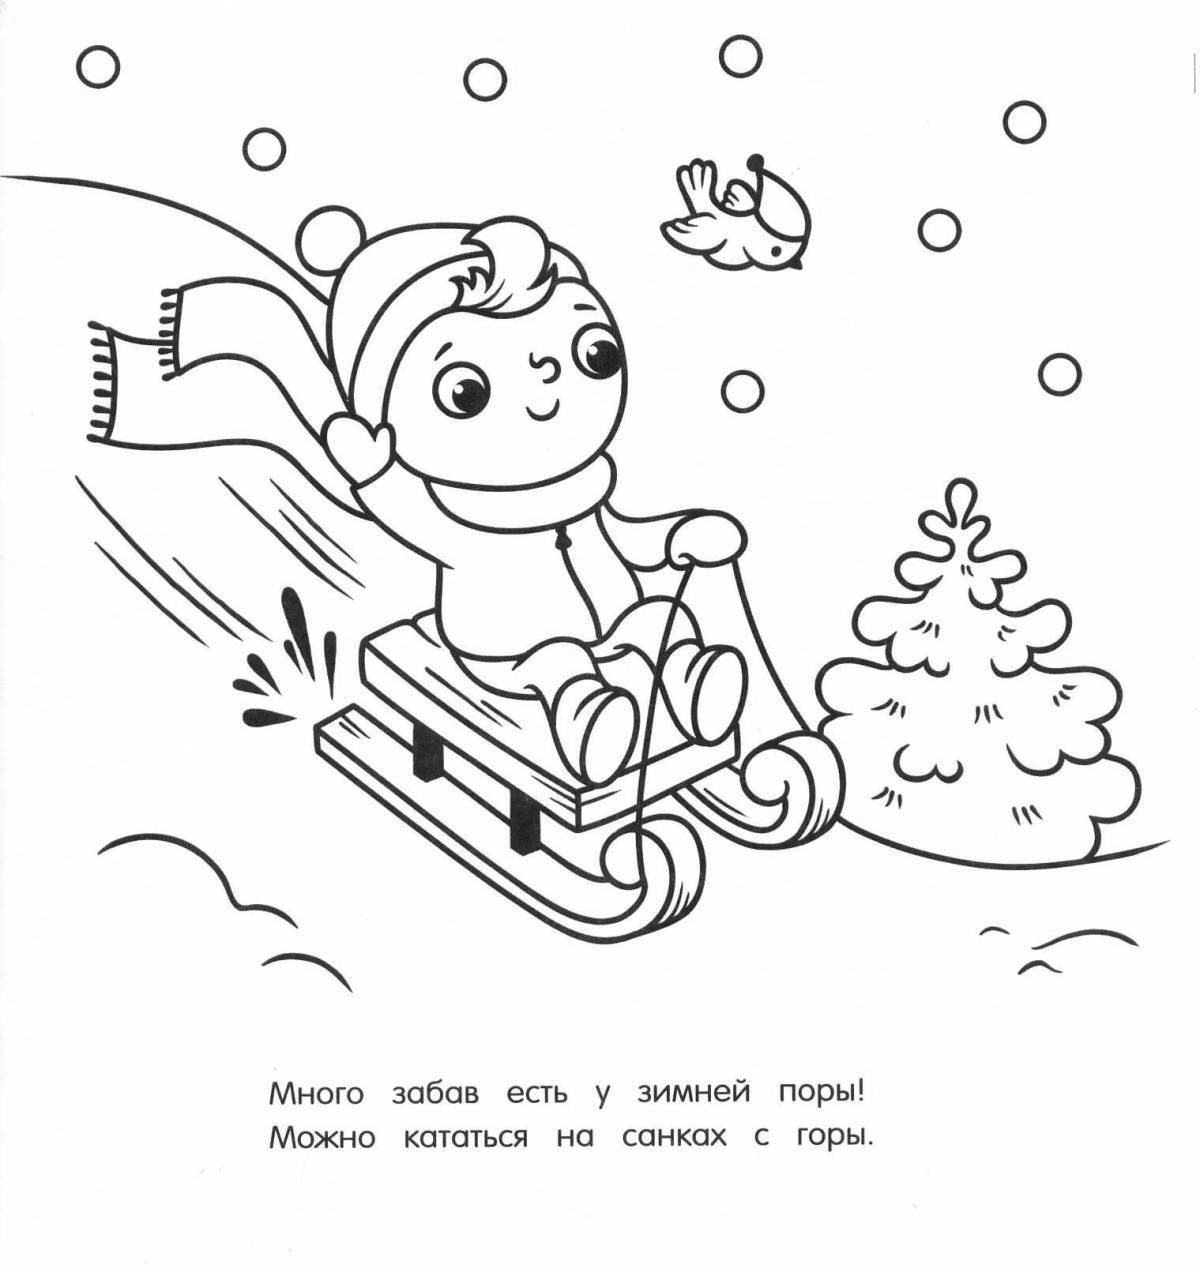 Coloring page of a cheerful child sledding